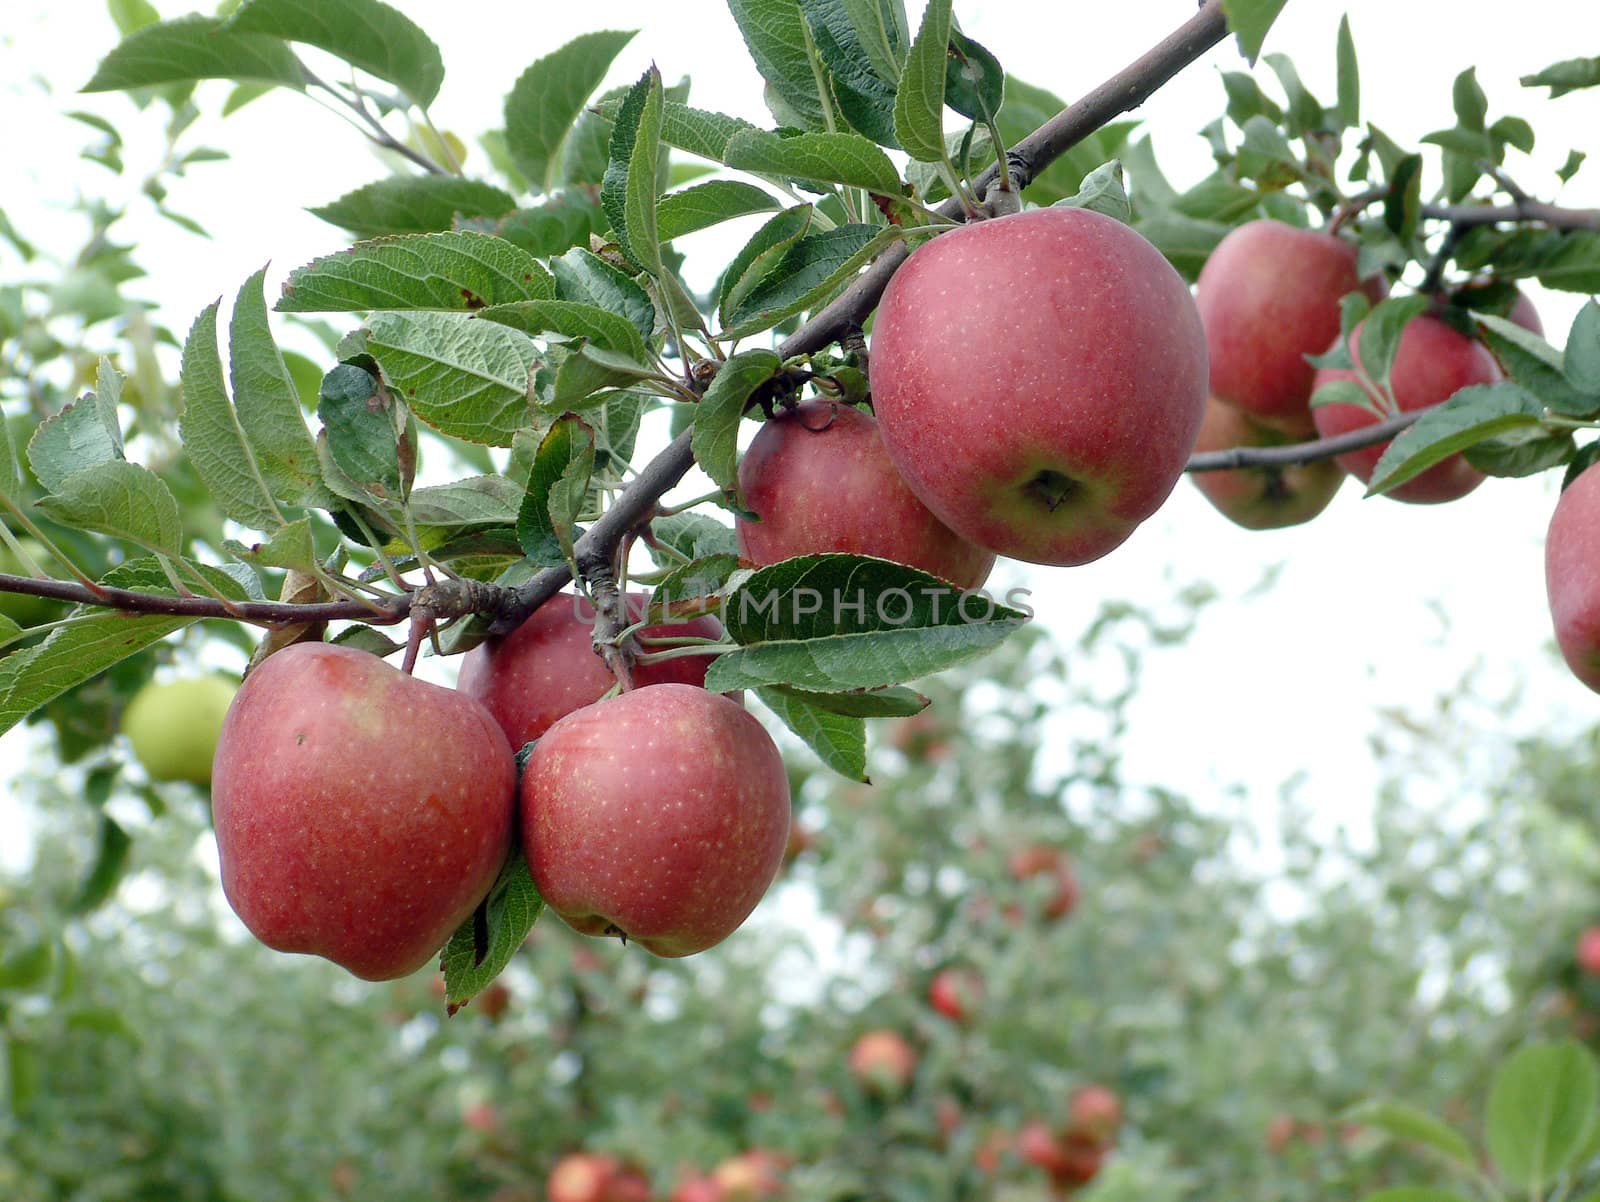 Apple Orchard Branch With Fruits